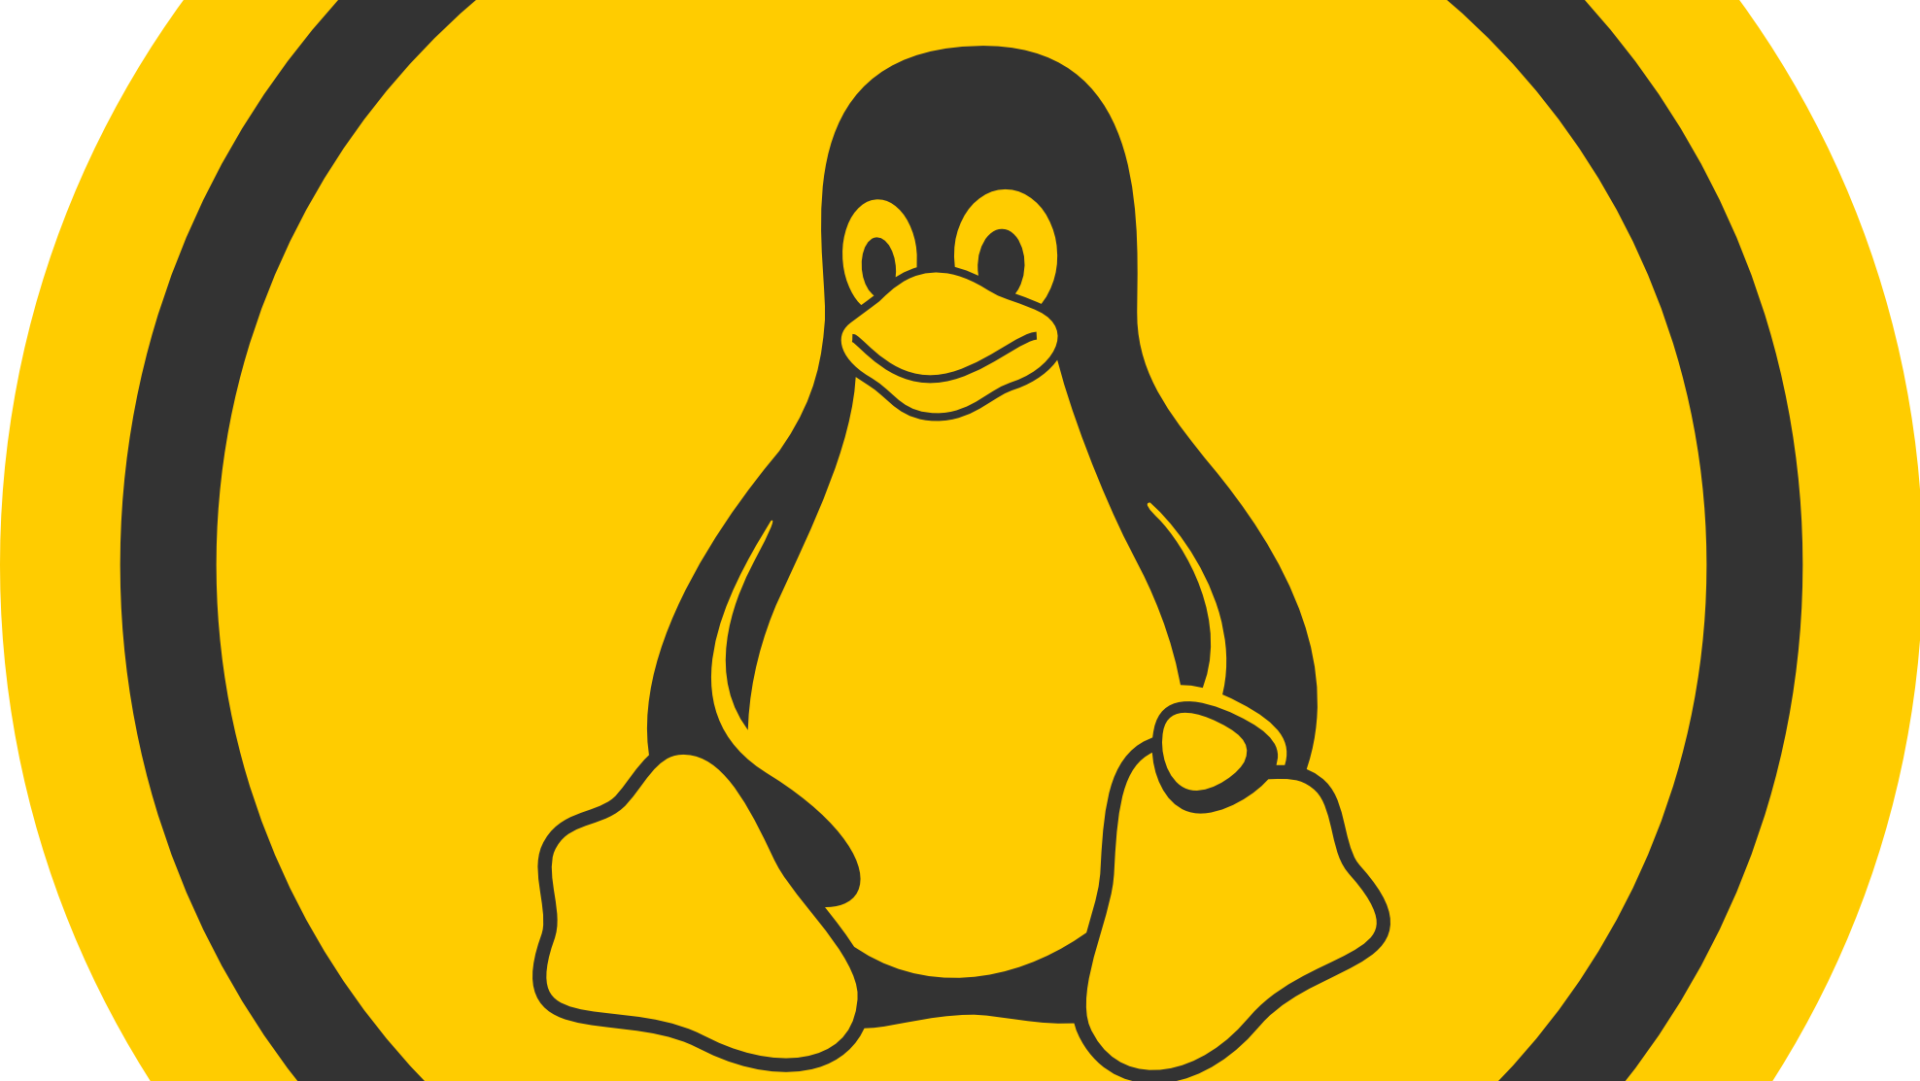 another linux howto